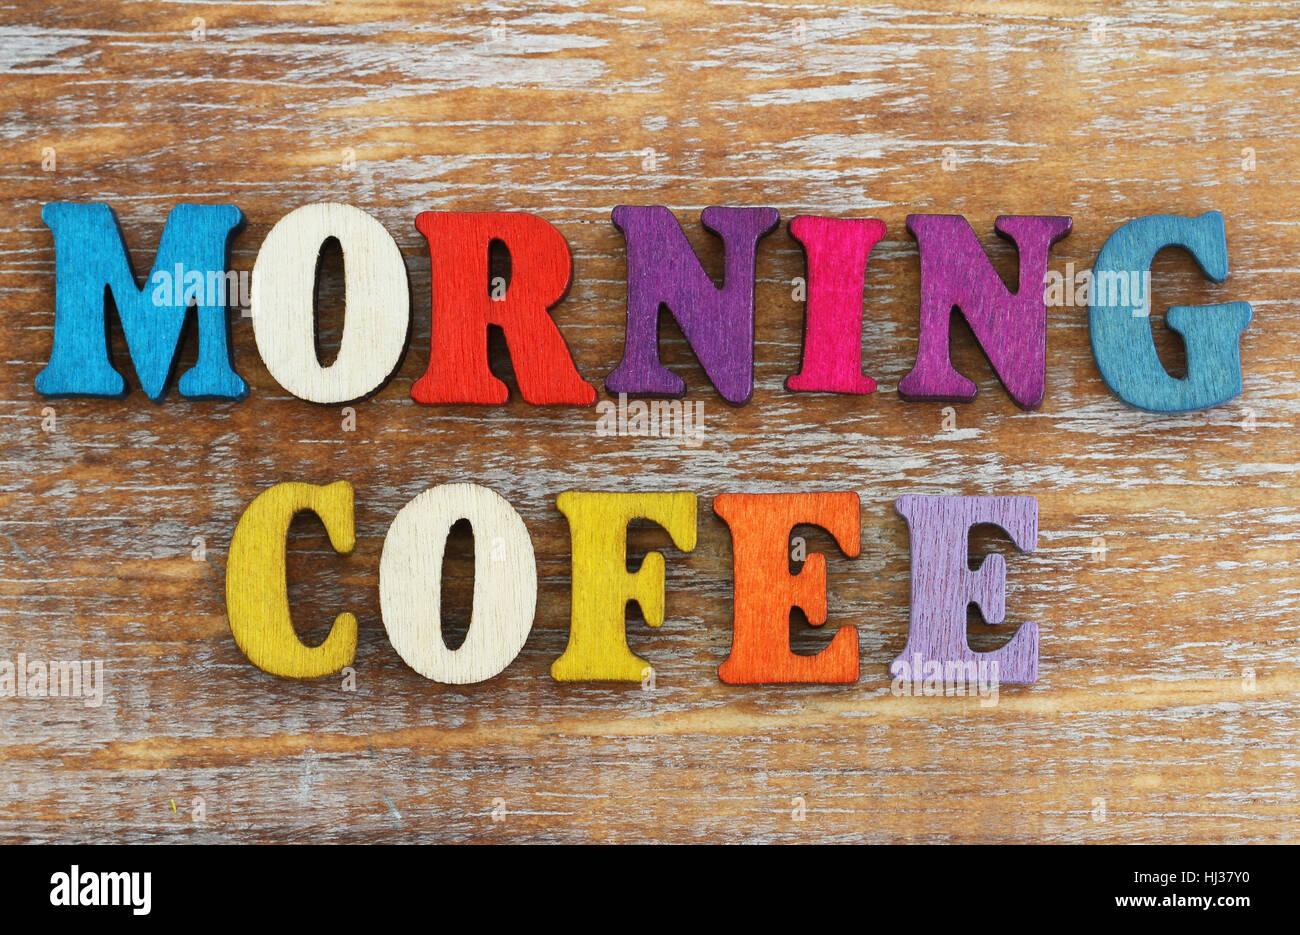 Morning coffee written with colorful letters on rustic wooden surface Stock Photo